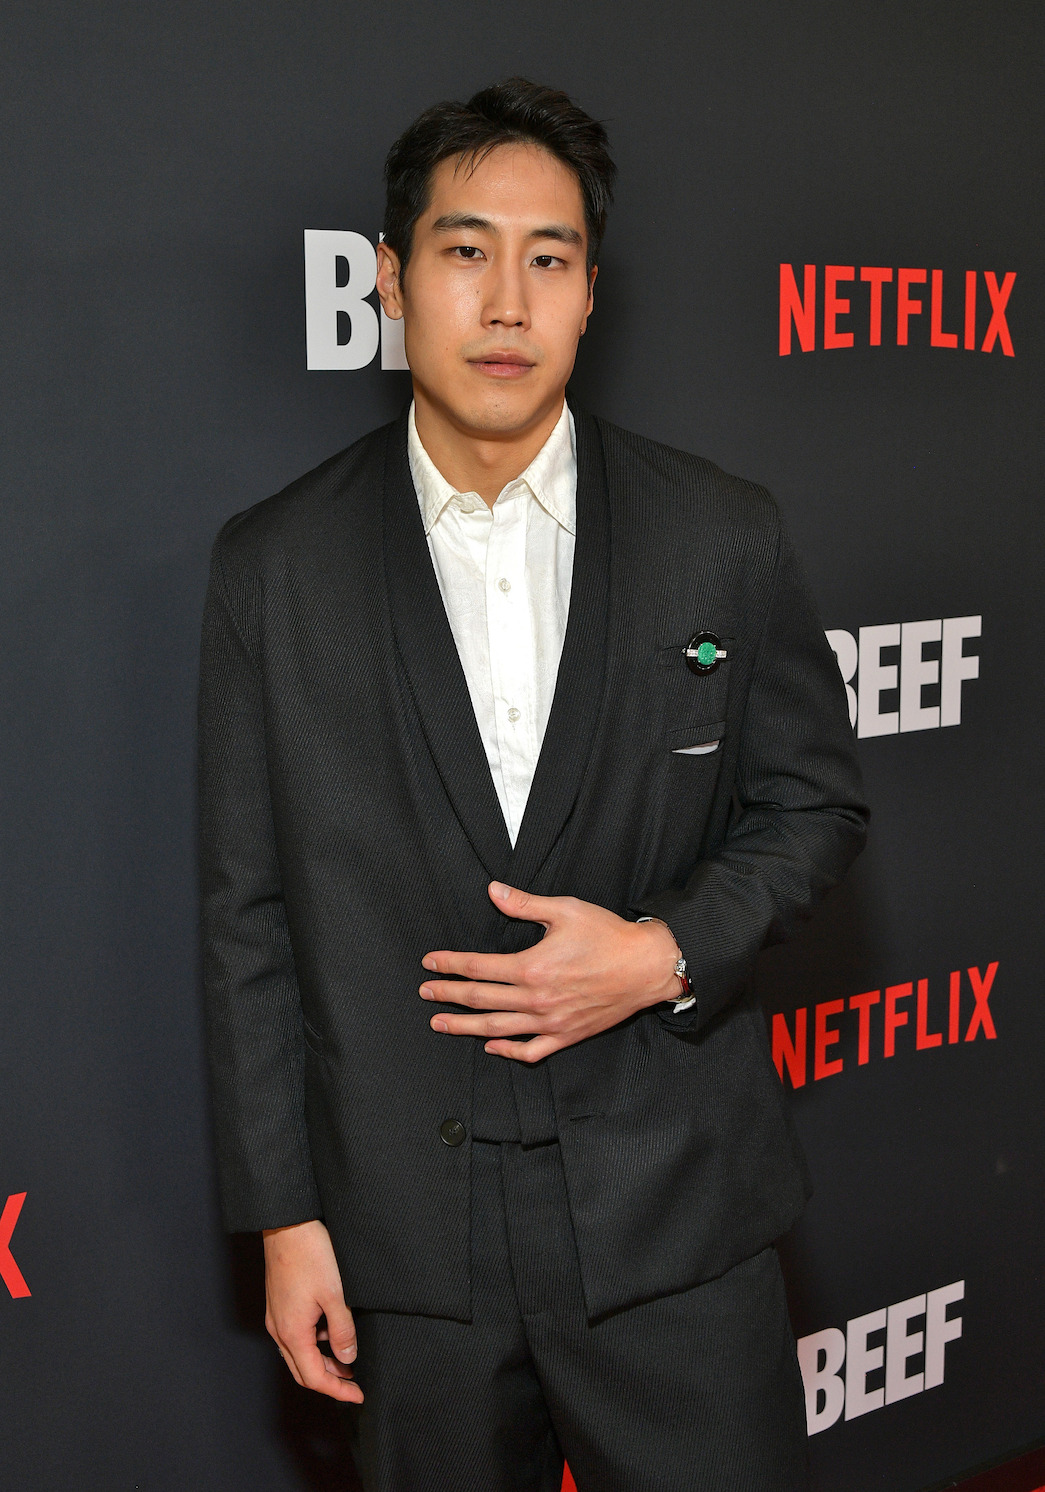 Young Mazino at the Los Angeles Premiere of Netflix's "BEEF" on March 30, 2023 in Hollywood, California.